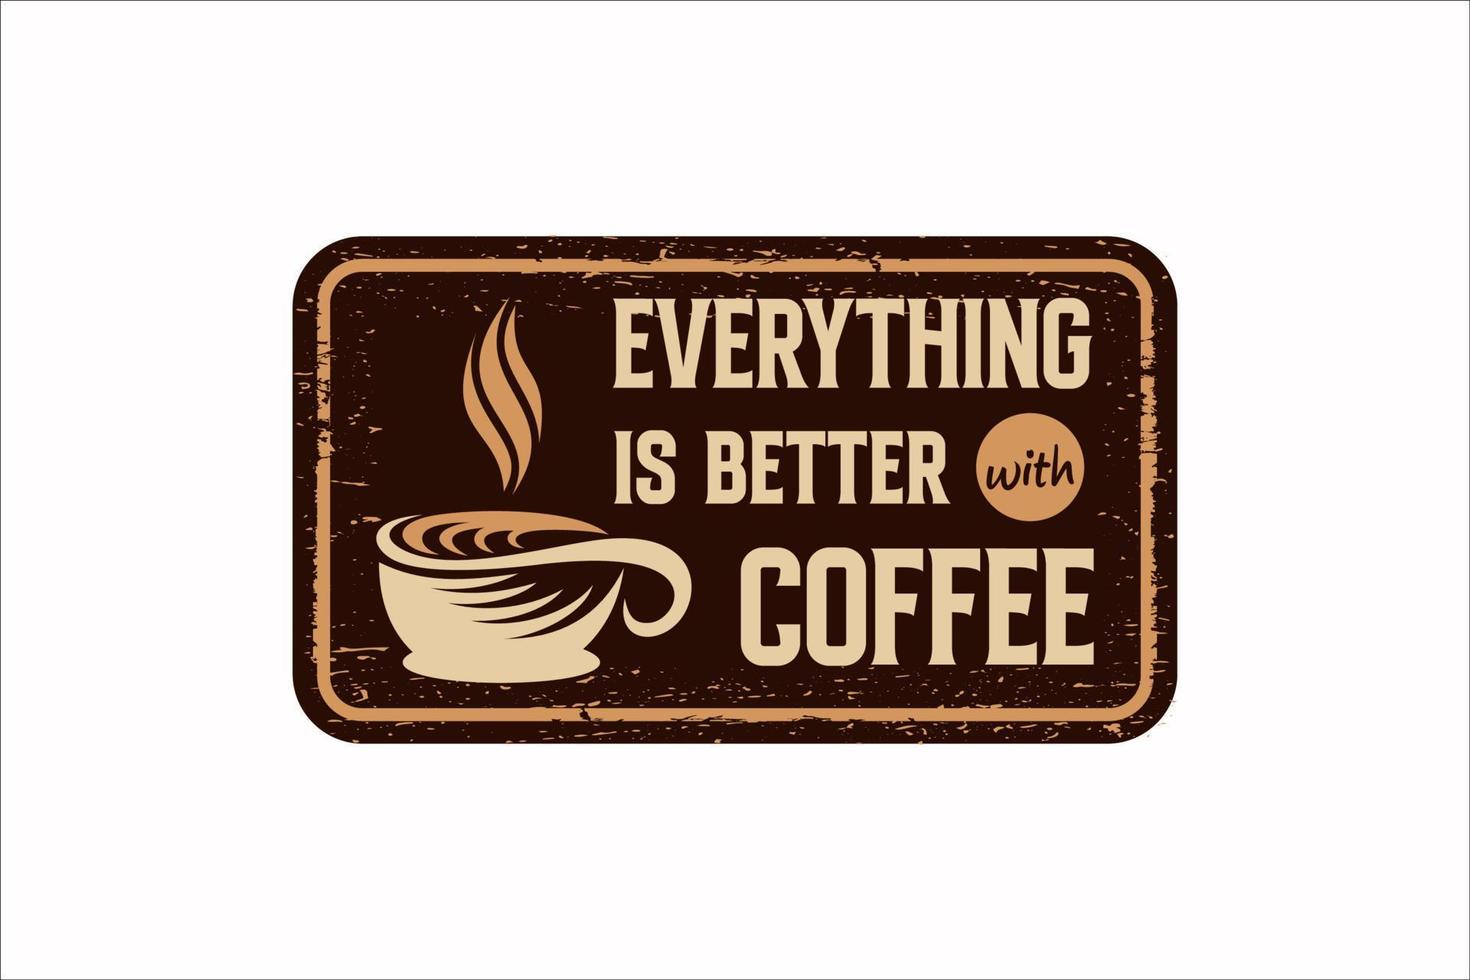 Everything is better with coffee vintage rusty metal sign on a white background, vector illustration